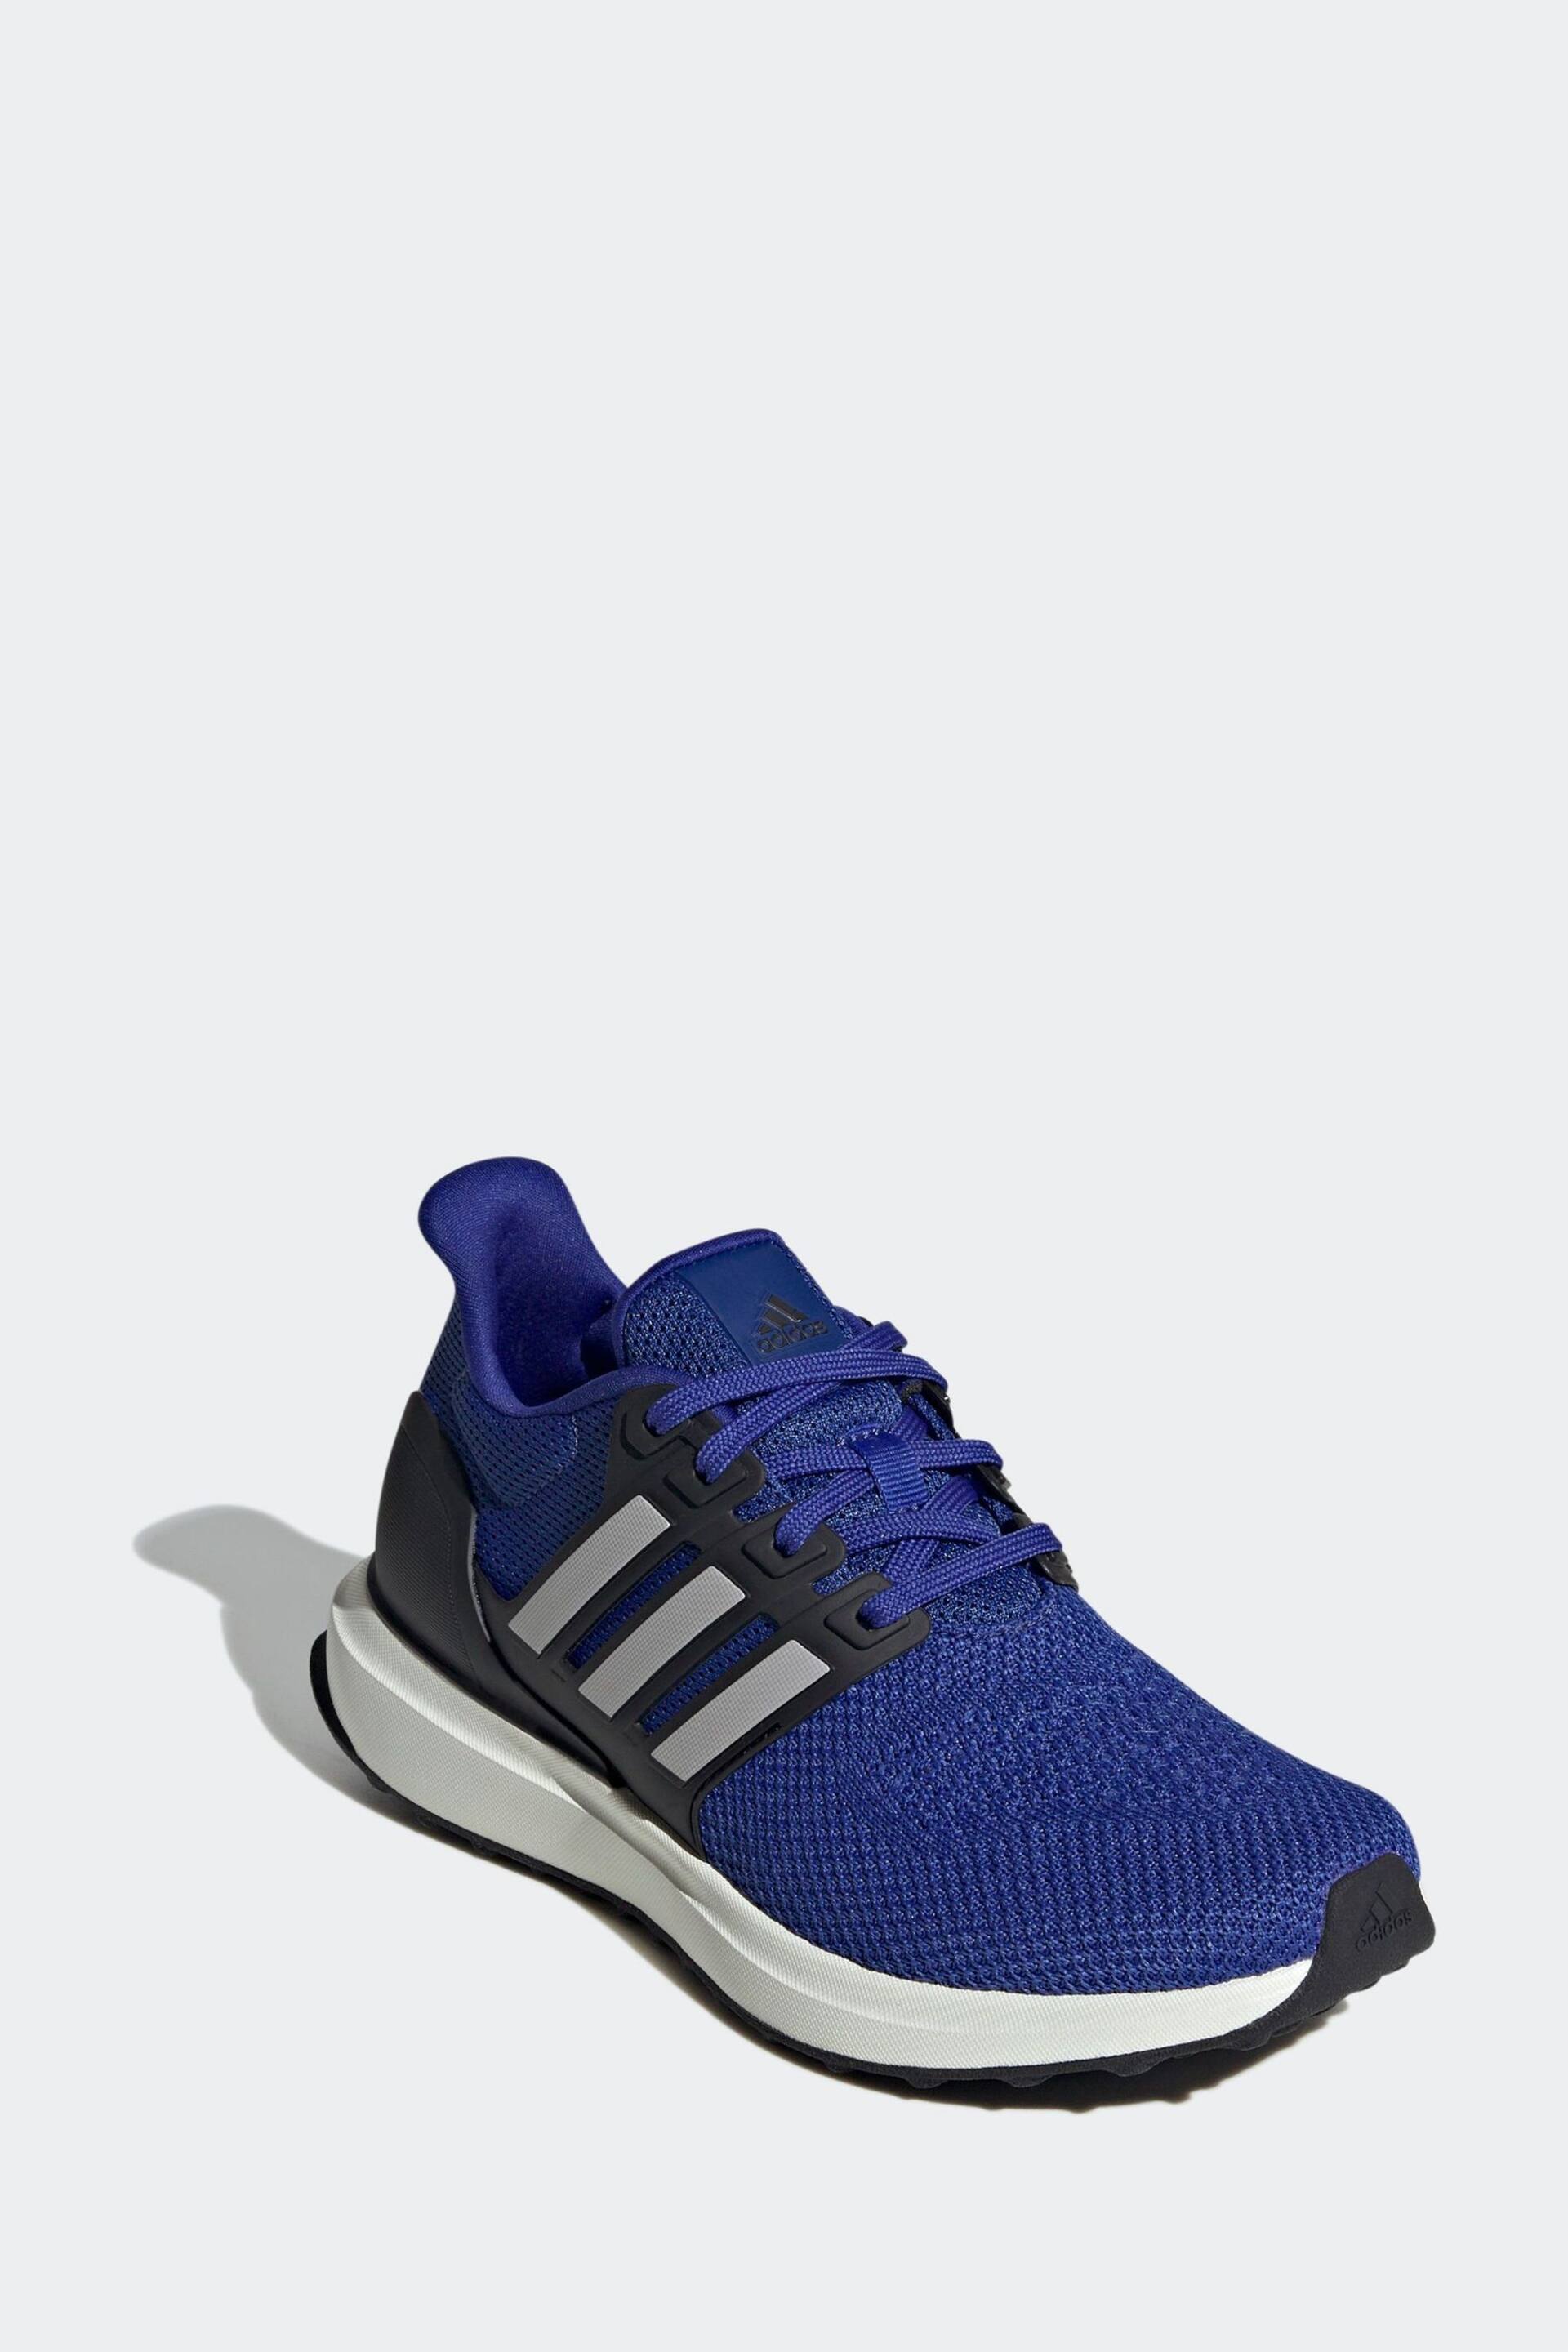 adidas Blue Sportswear Ubounce Dna Trainers - Image 3 of 9